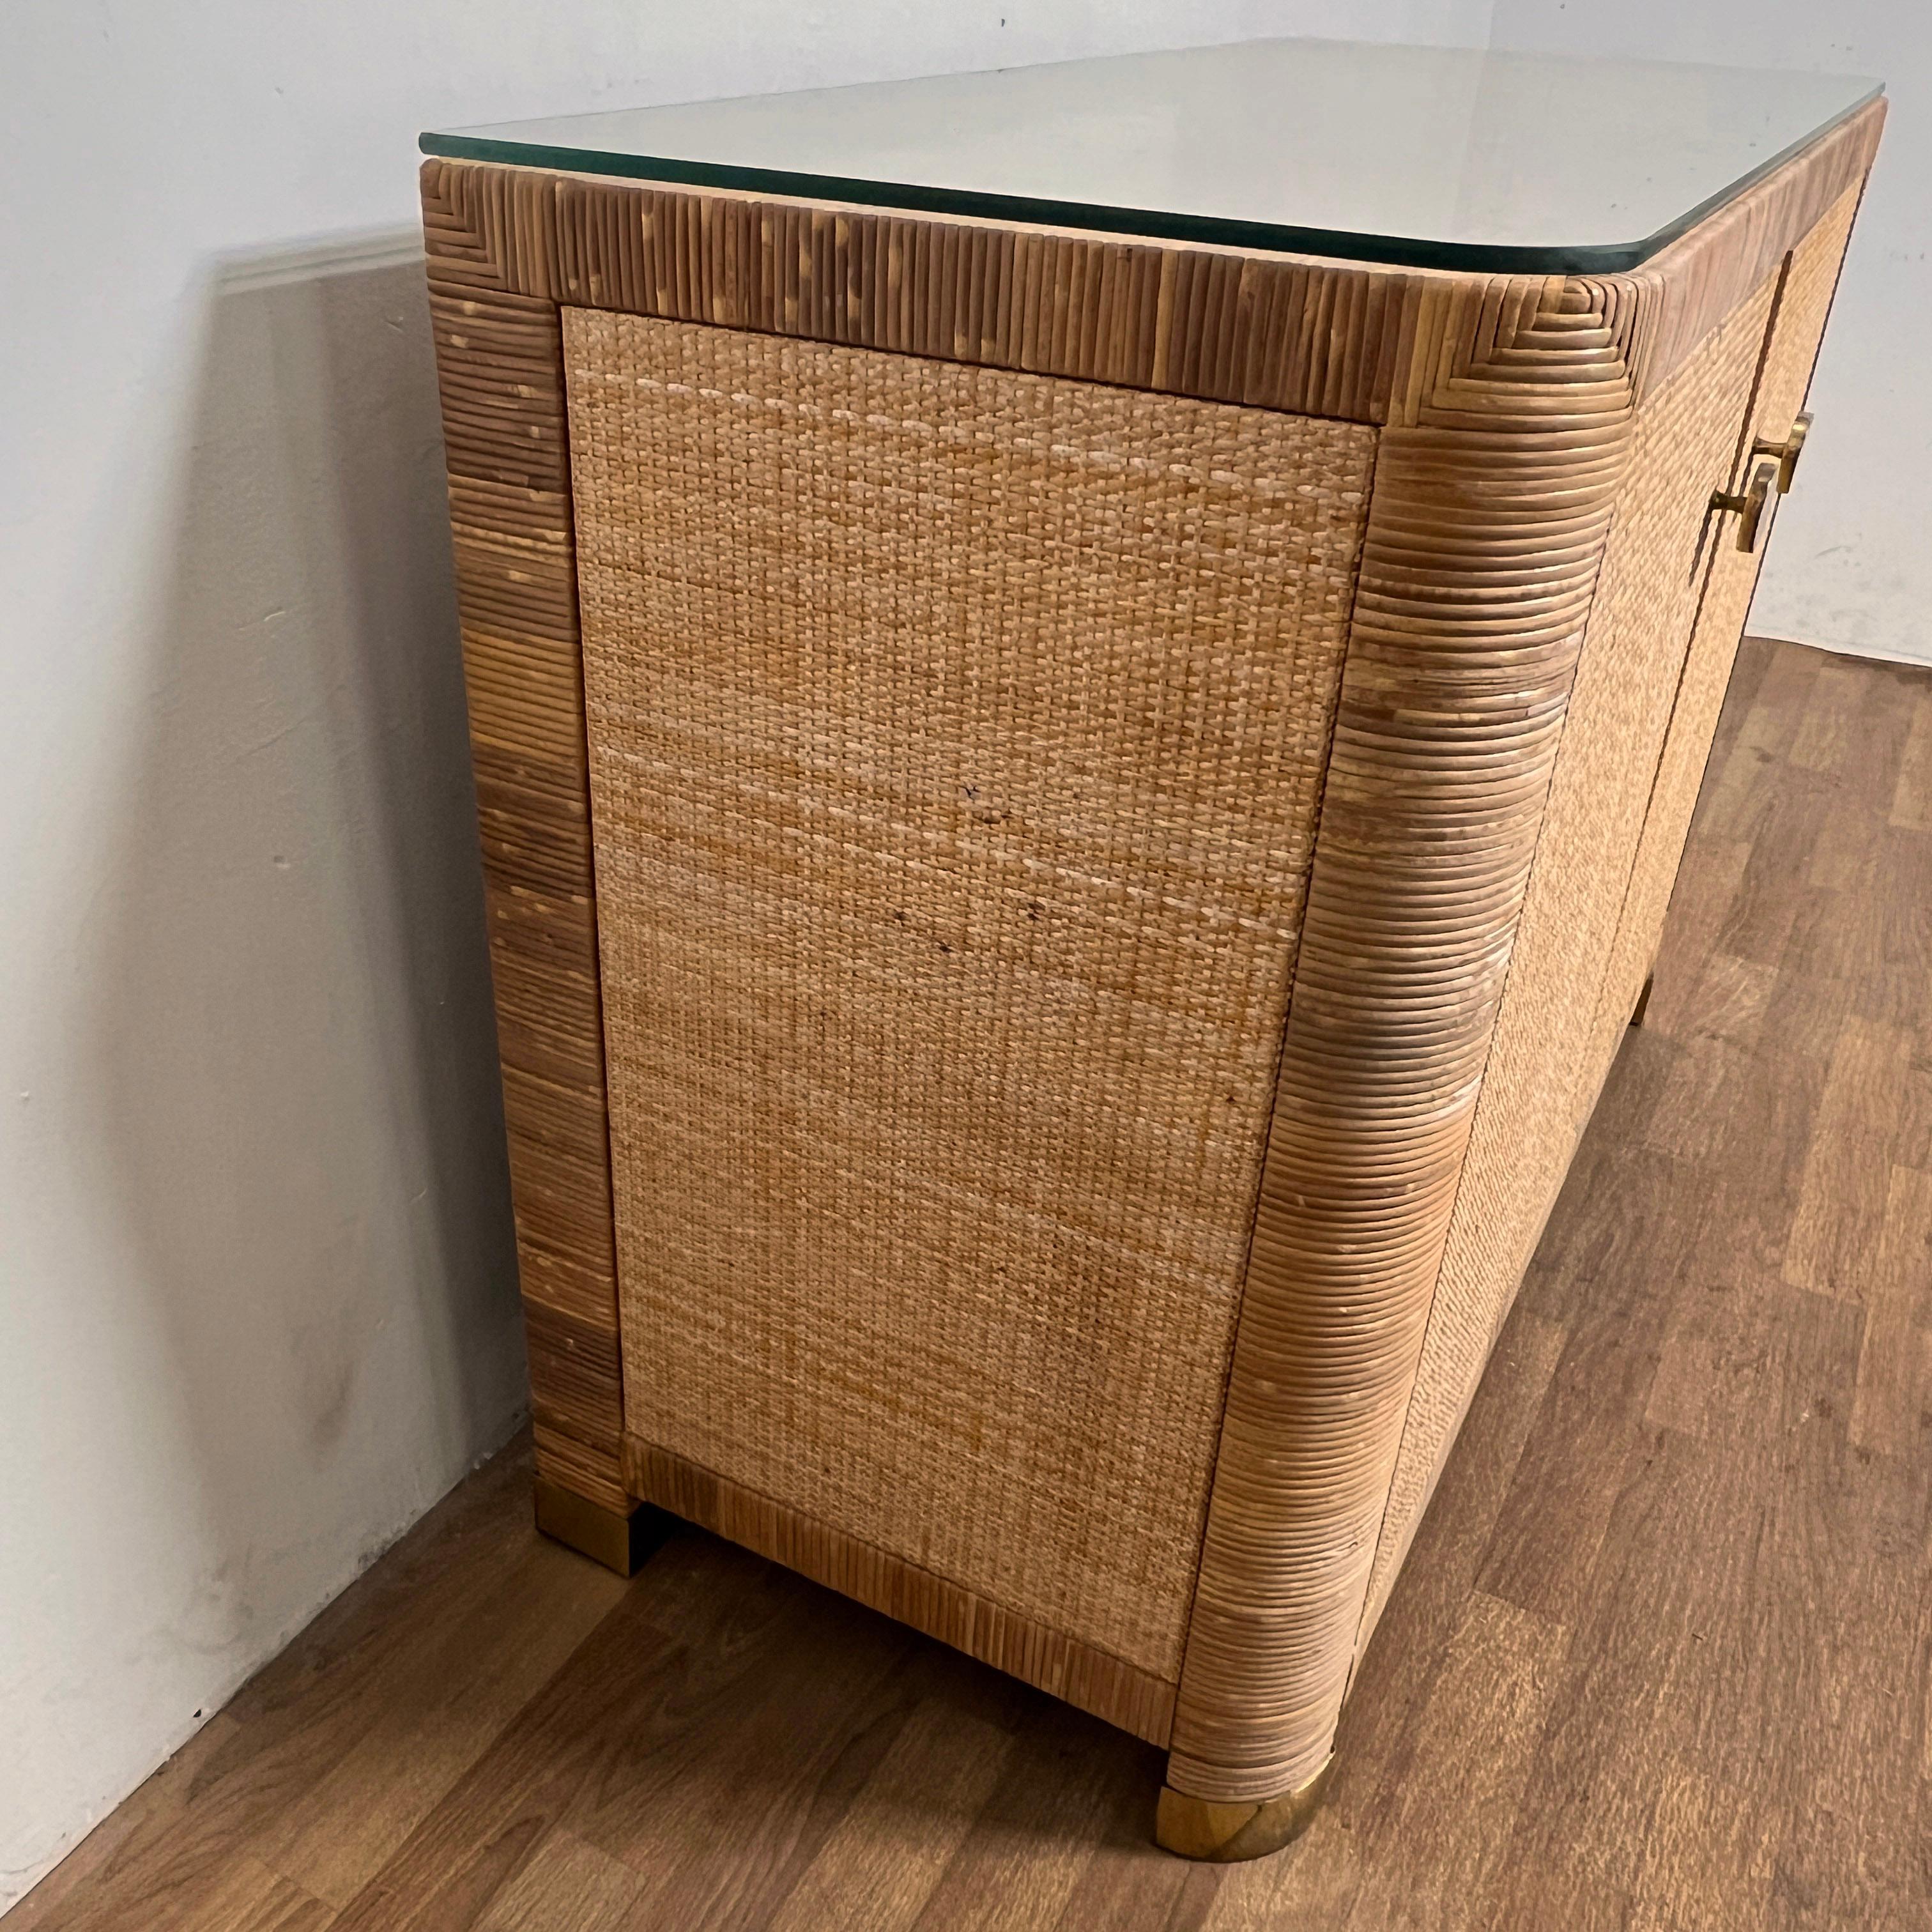 Bielecky Brothers Cane and Rattan Wrapped Cabinet, Circa 1980s For Sale 4